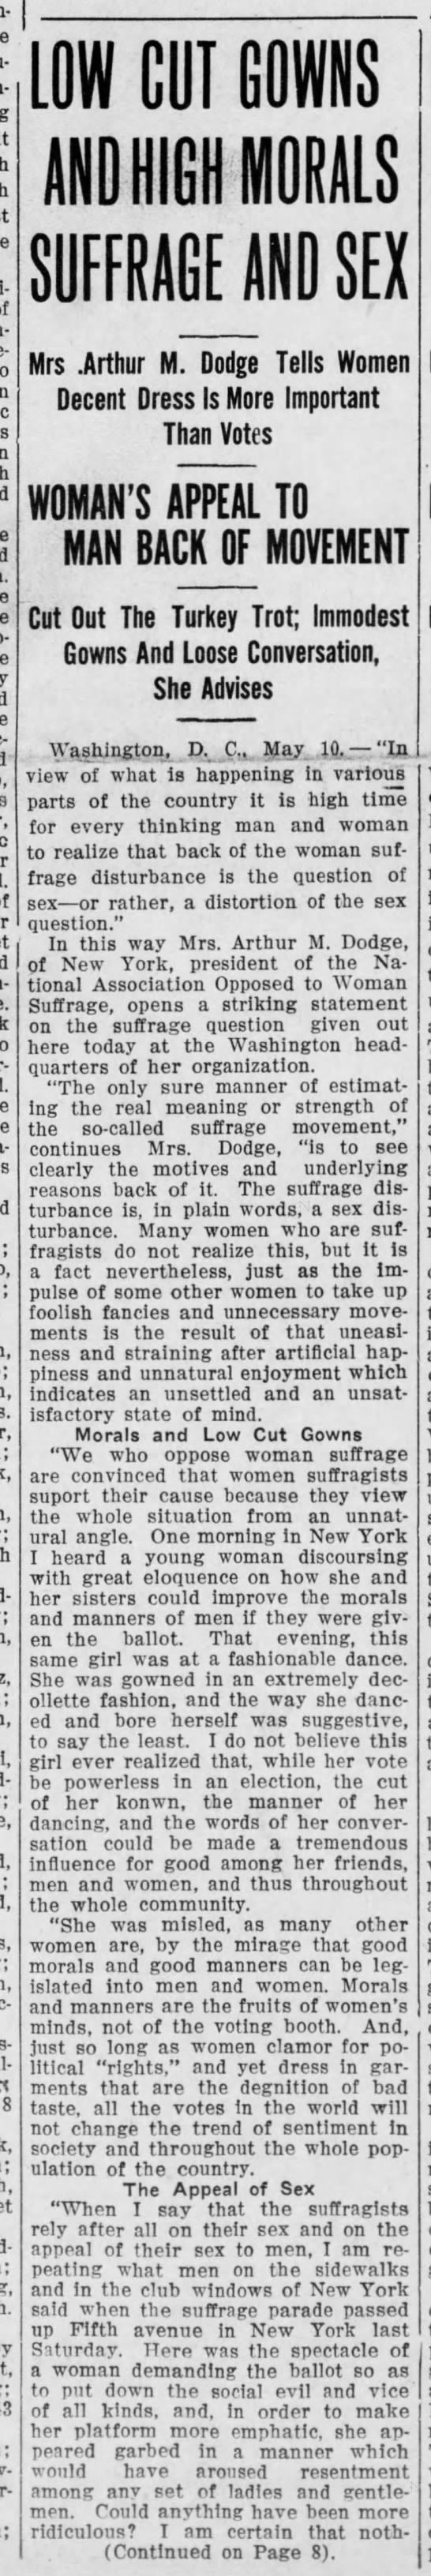 Josephine Jewell Dodge on immorality and suffrage (1913). - 